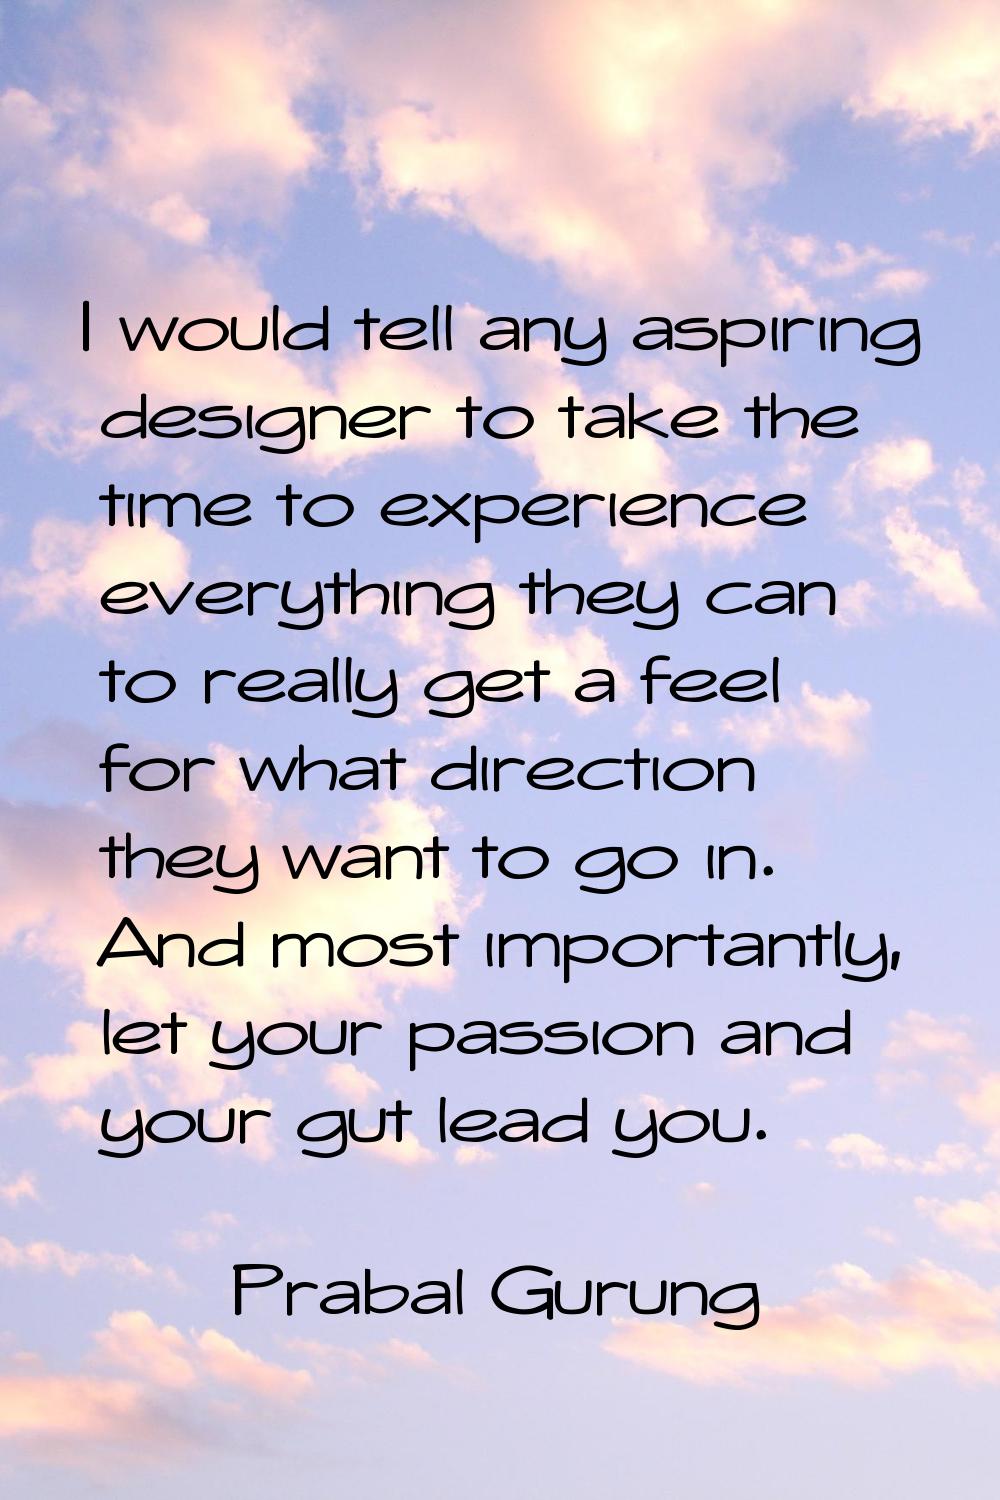 I would tell any aspiring designer to take the time to experience everything they can to really get